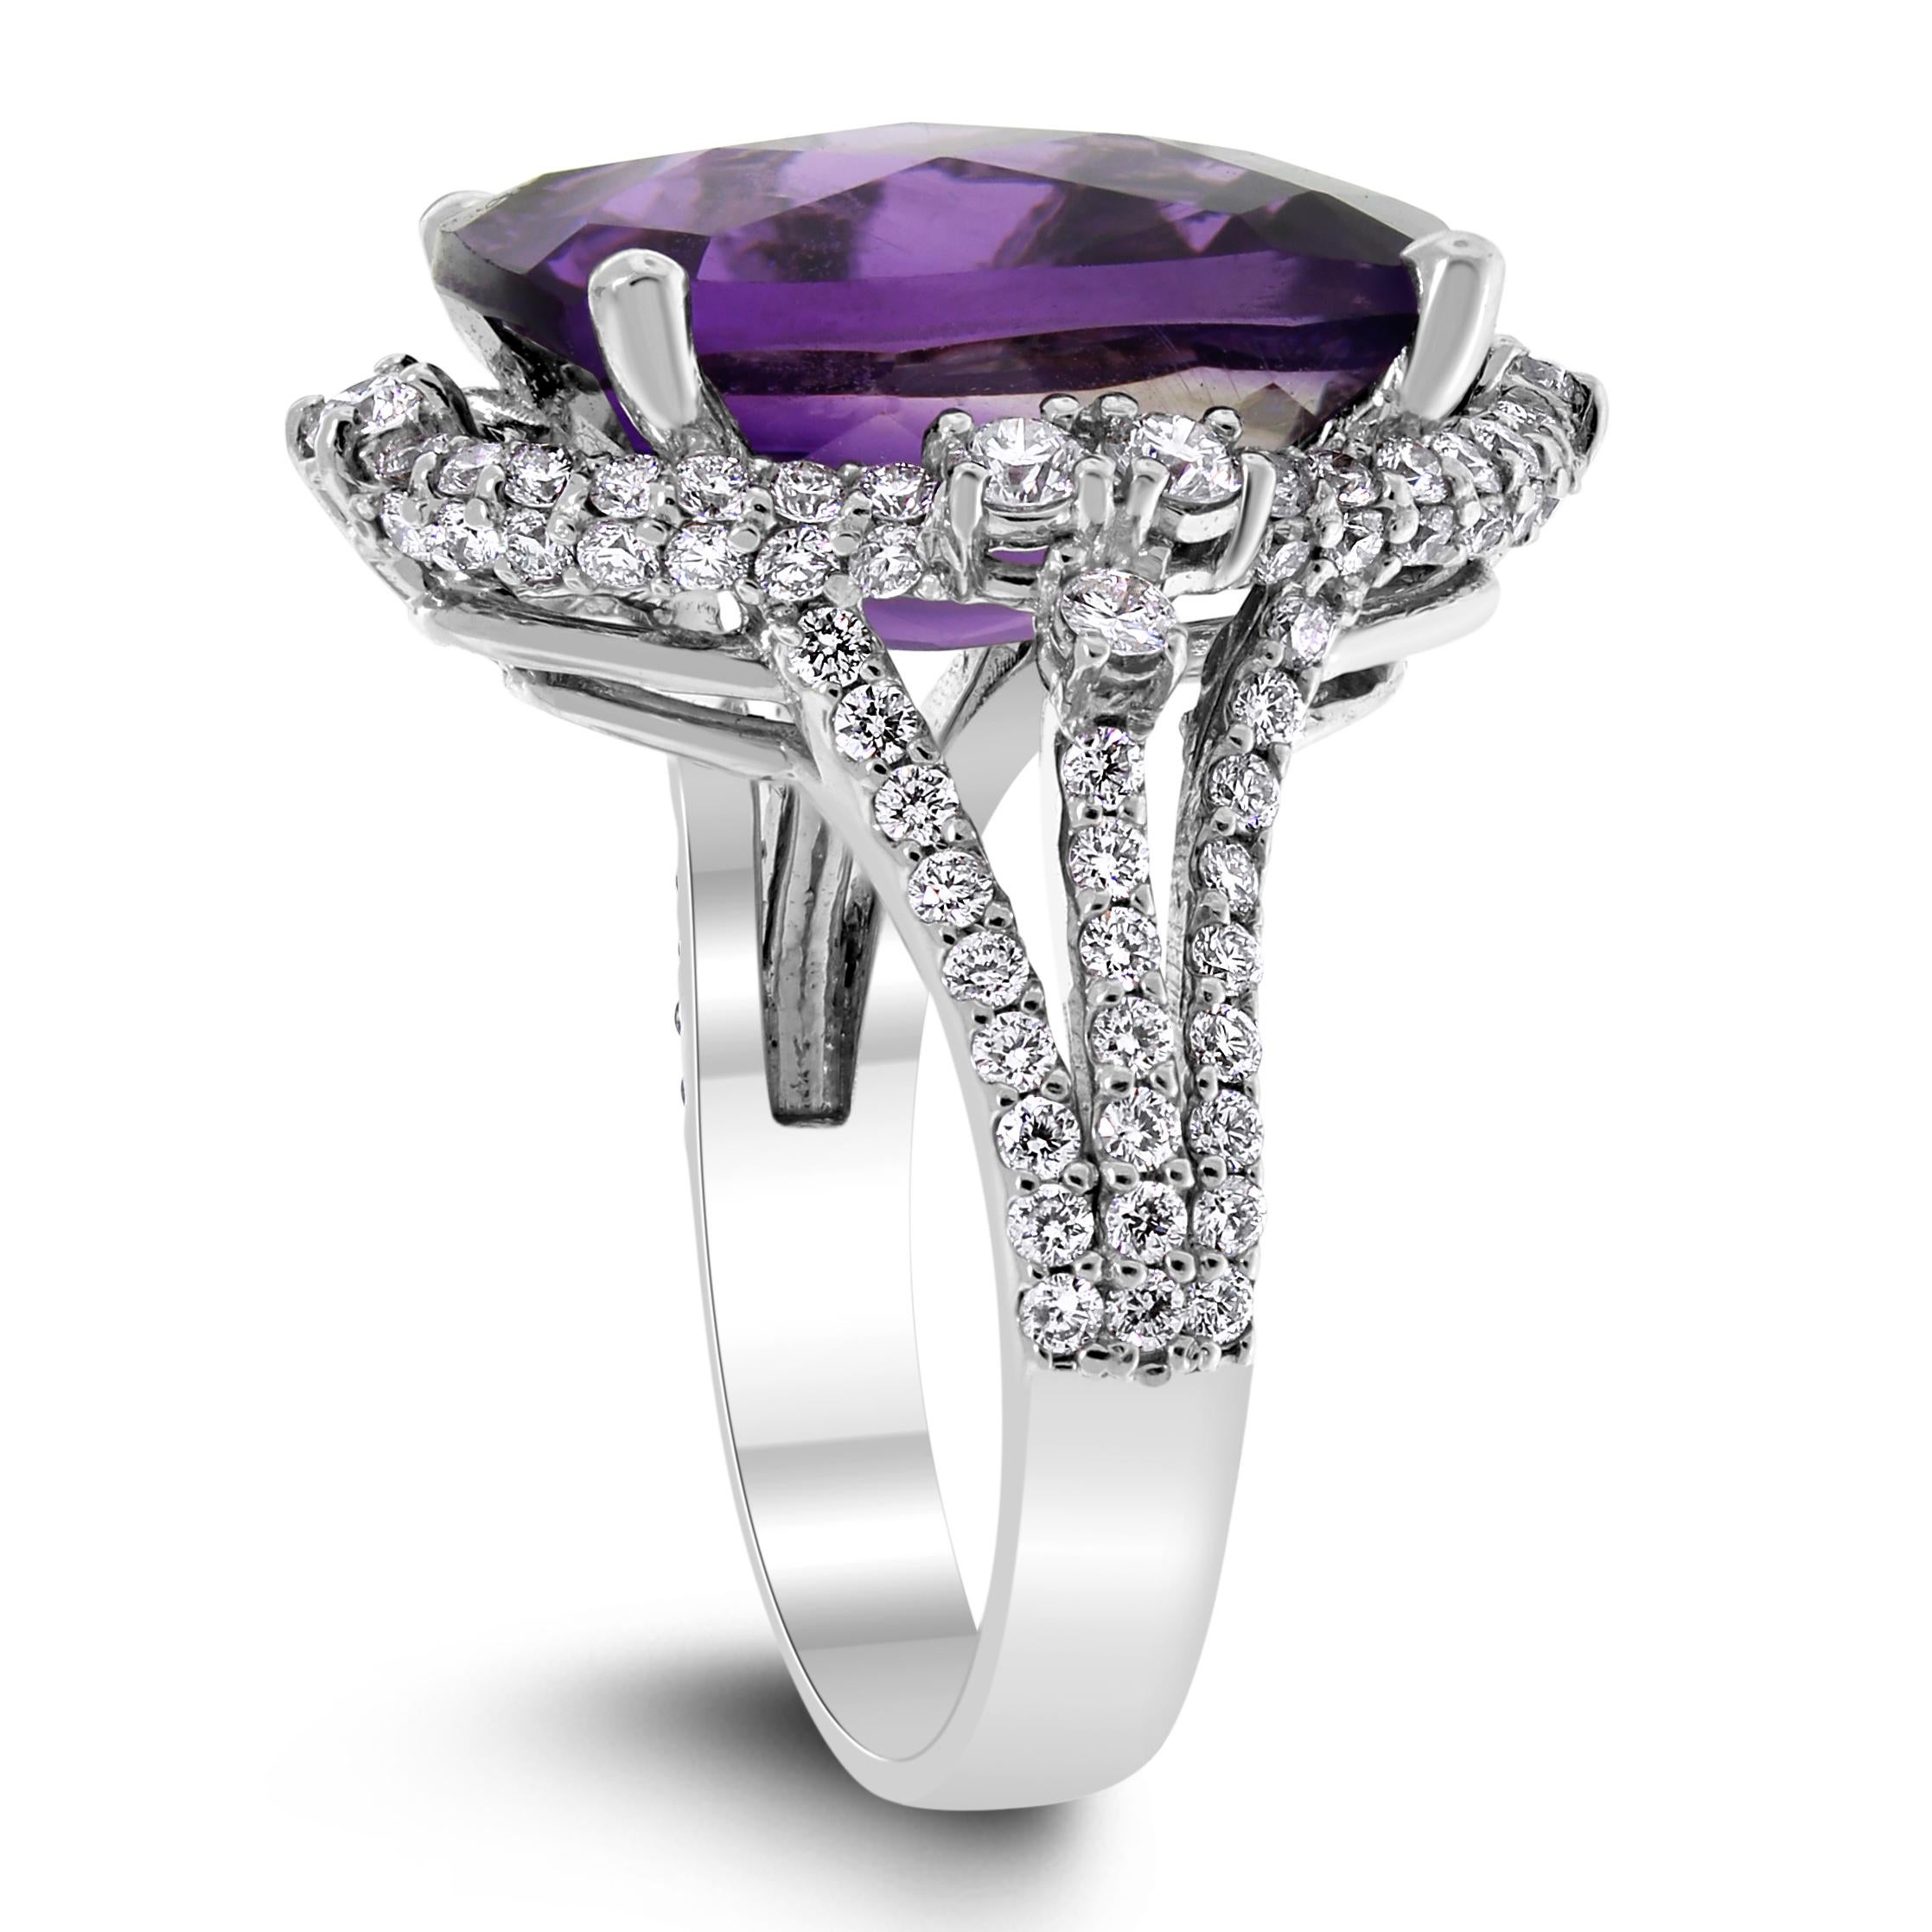 The Beauvince Purple Crush ring features a gorgeous Amethyst which holds its own set in a unique Diamond halo setting. 

Gemstones Type: Amethyst 
Gemstones Shape: Elongated Cushion 
Gemstones Weight: 9.24 ct 
Gemstones Color: Deep Purple 
Gemstones